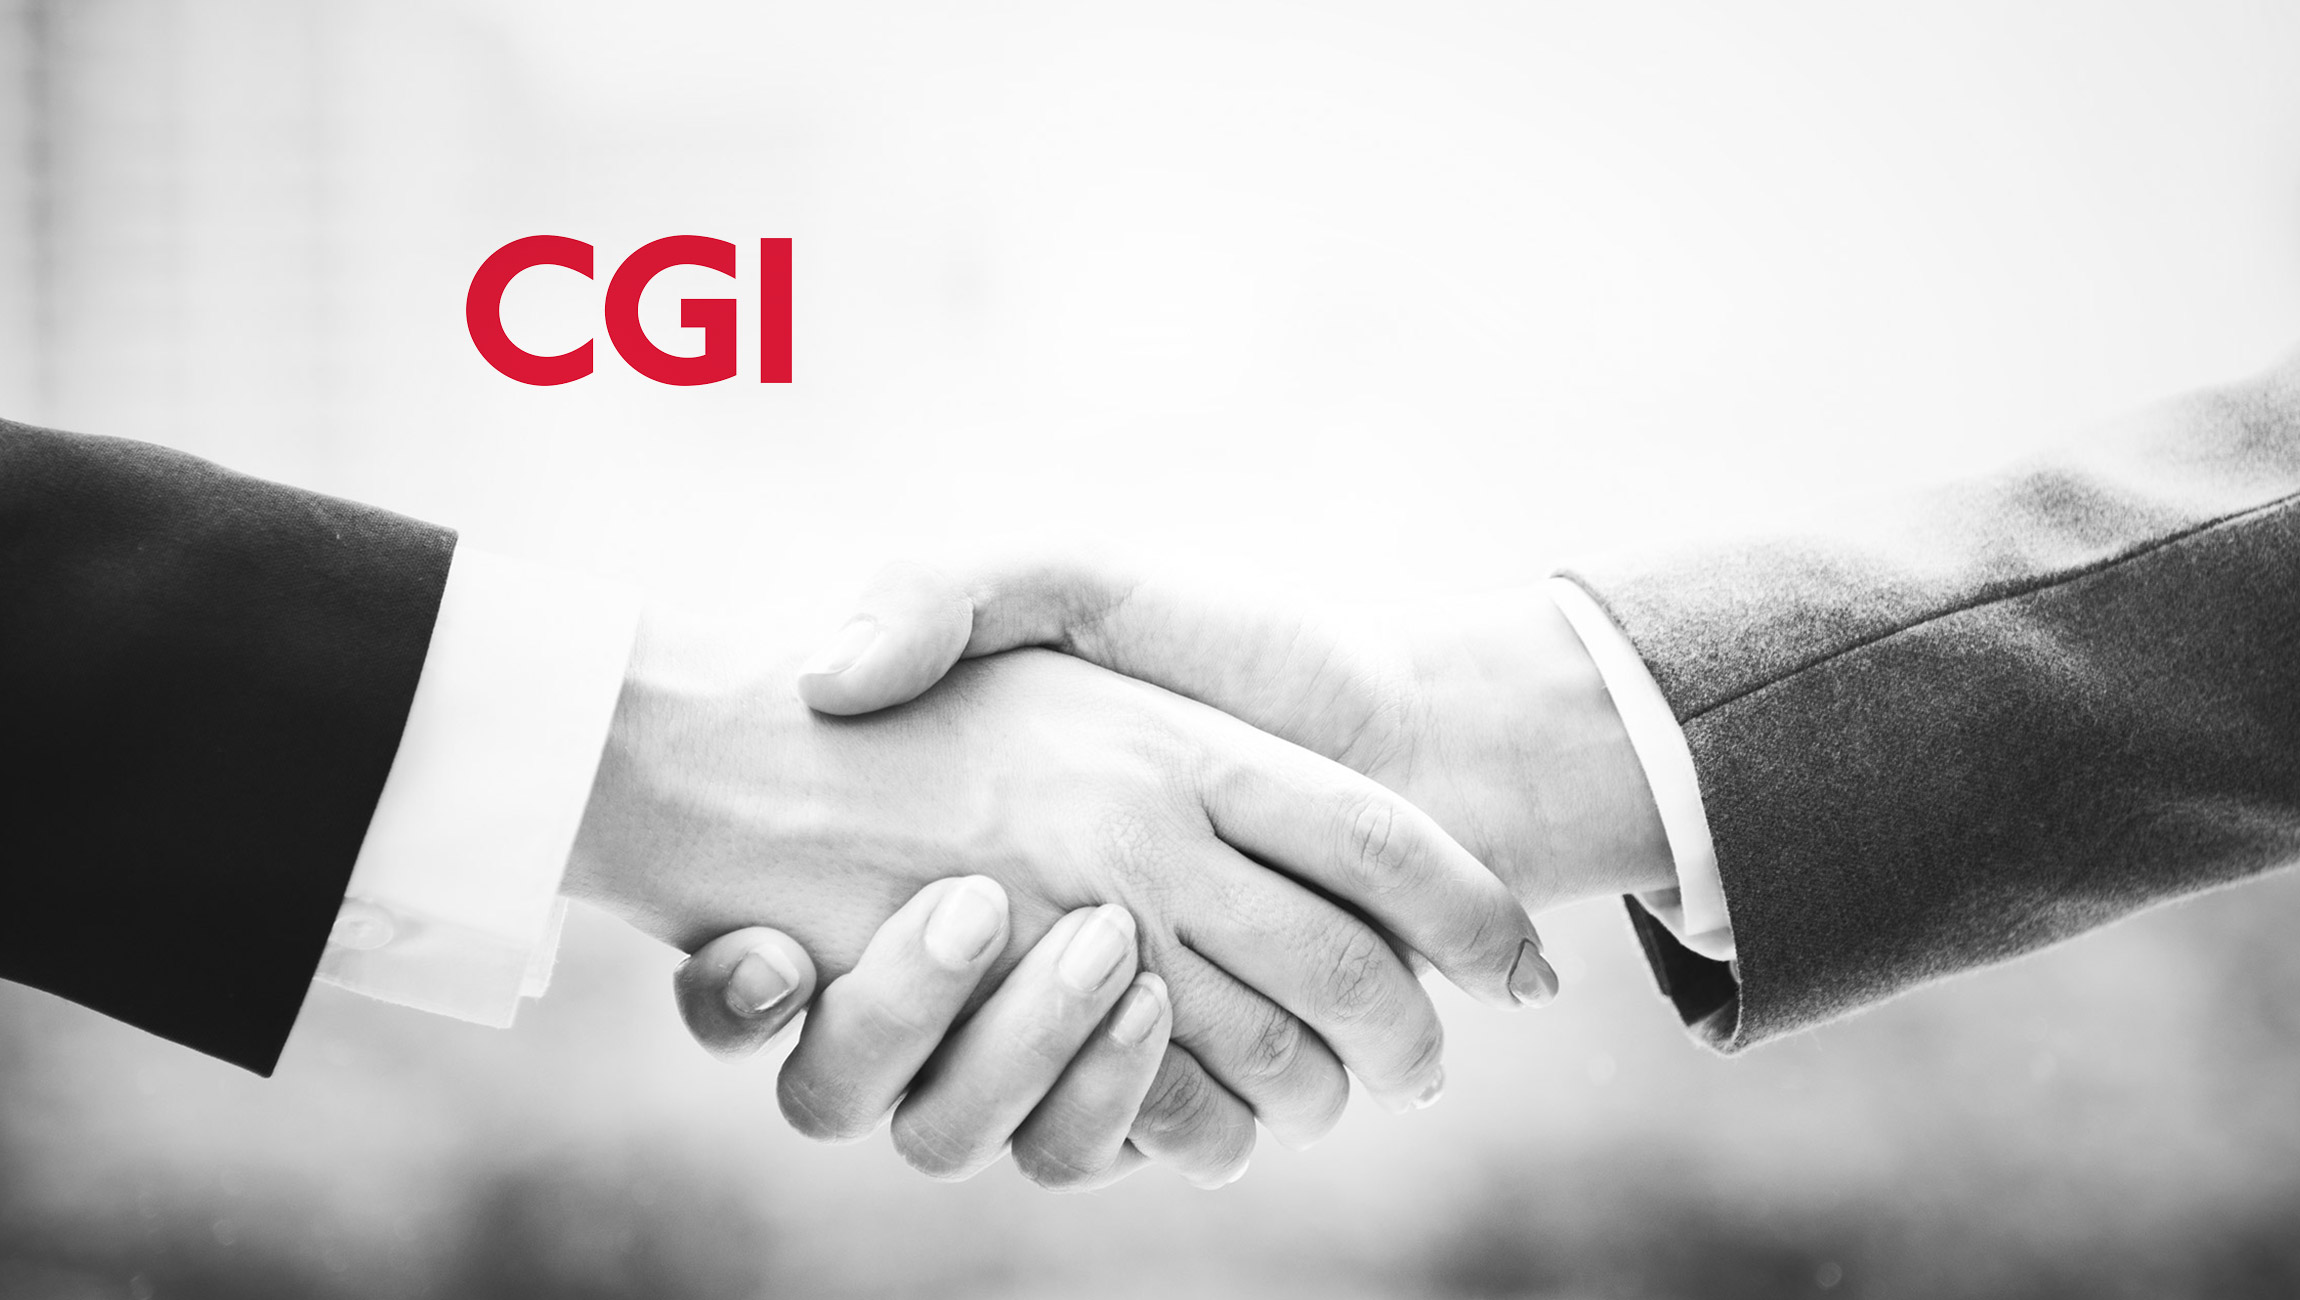 UnifyCloud Announces Partnership with CGI to Accelerate Cloud Assessment, Modernization, and Migration